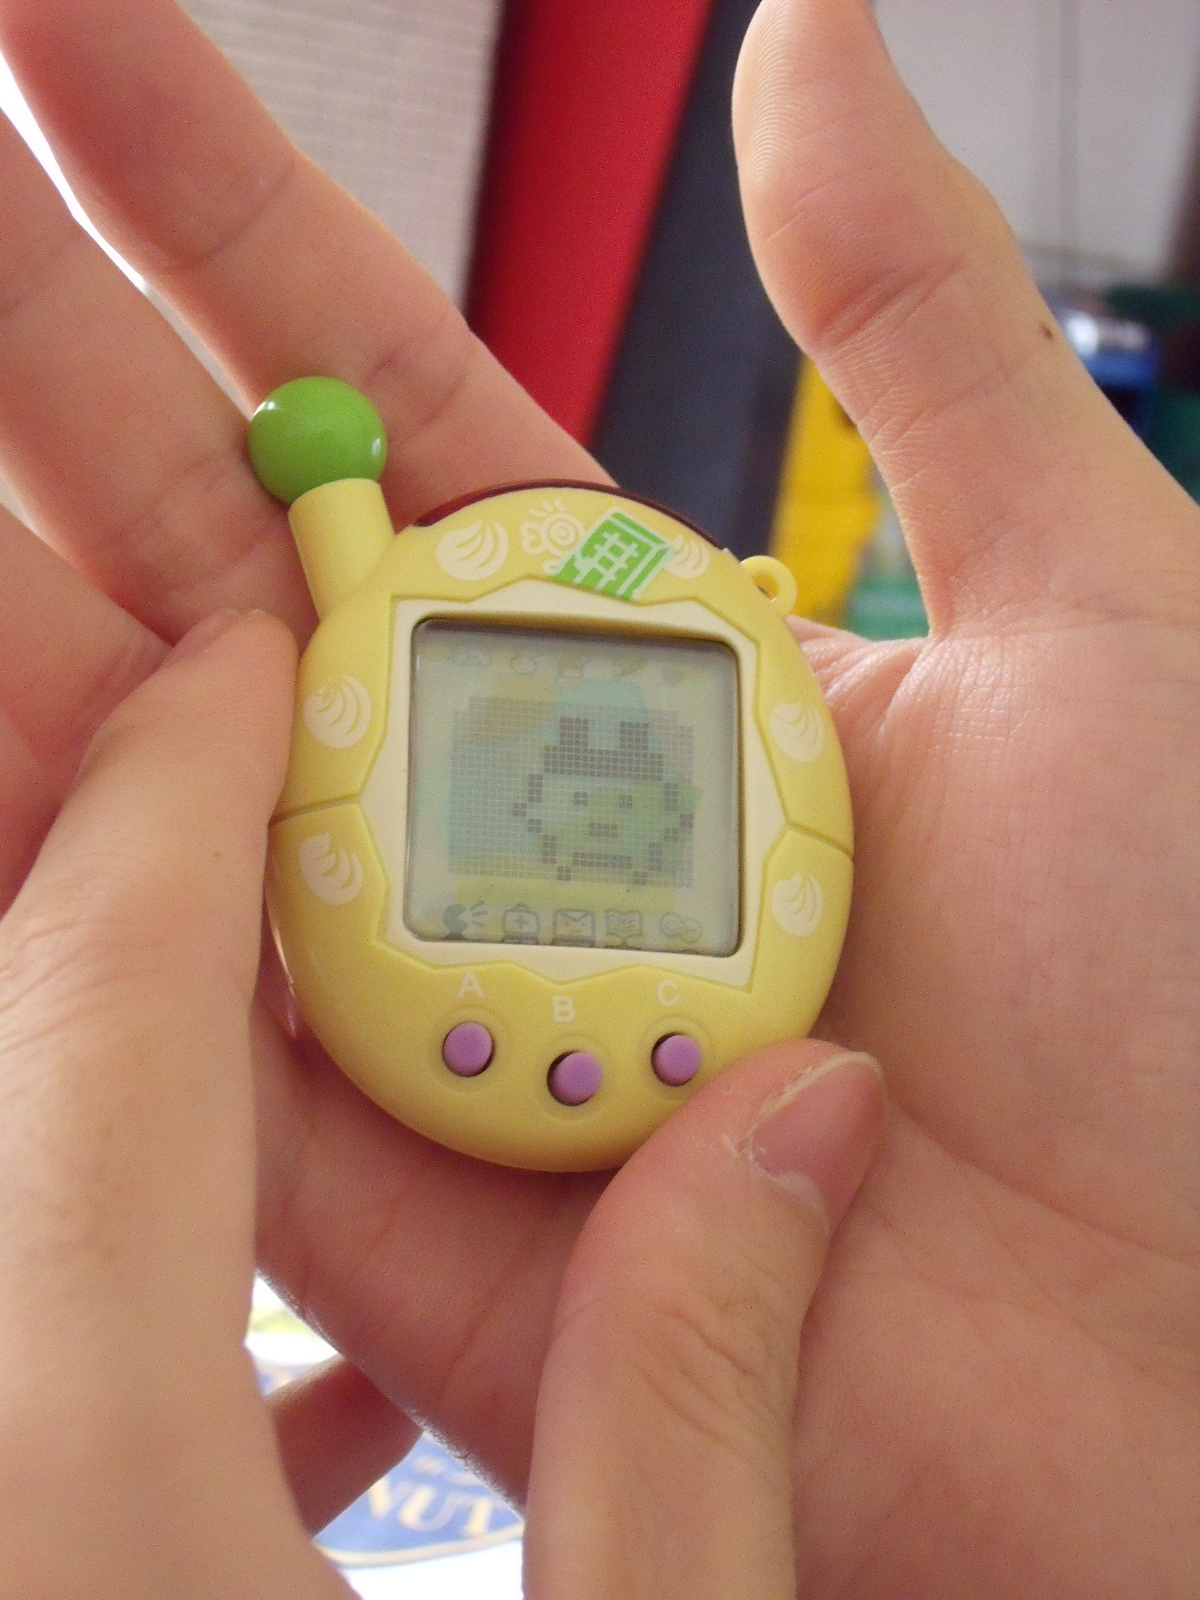 on the picture you se a tamagotchi